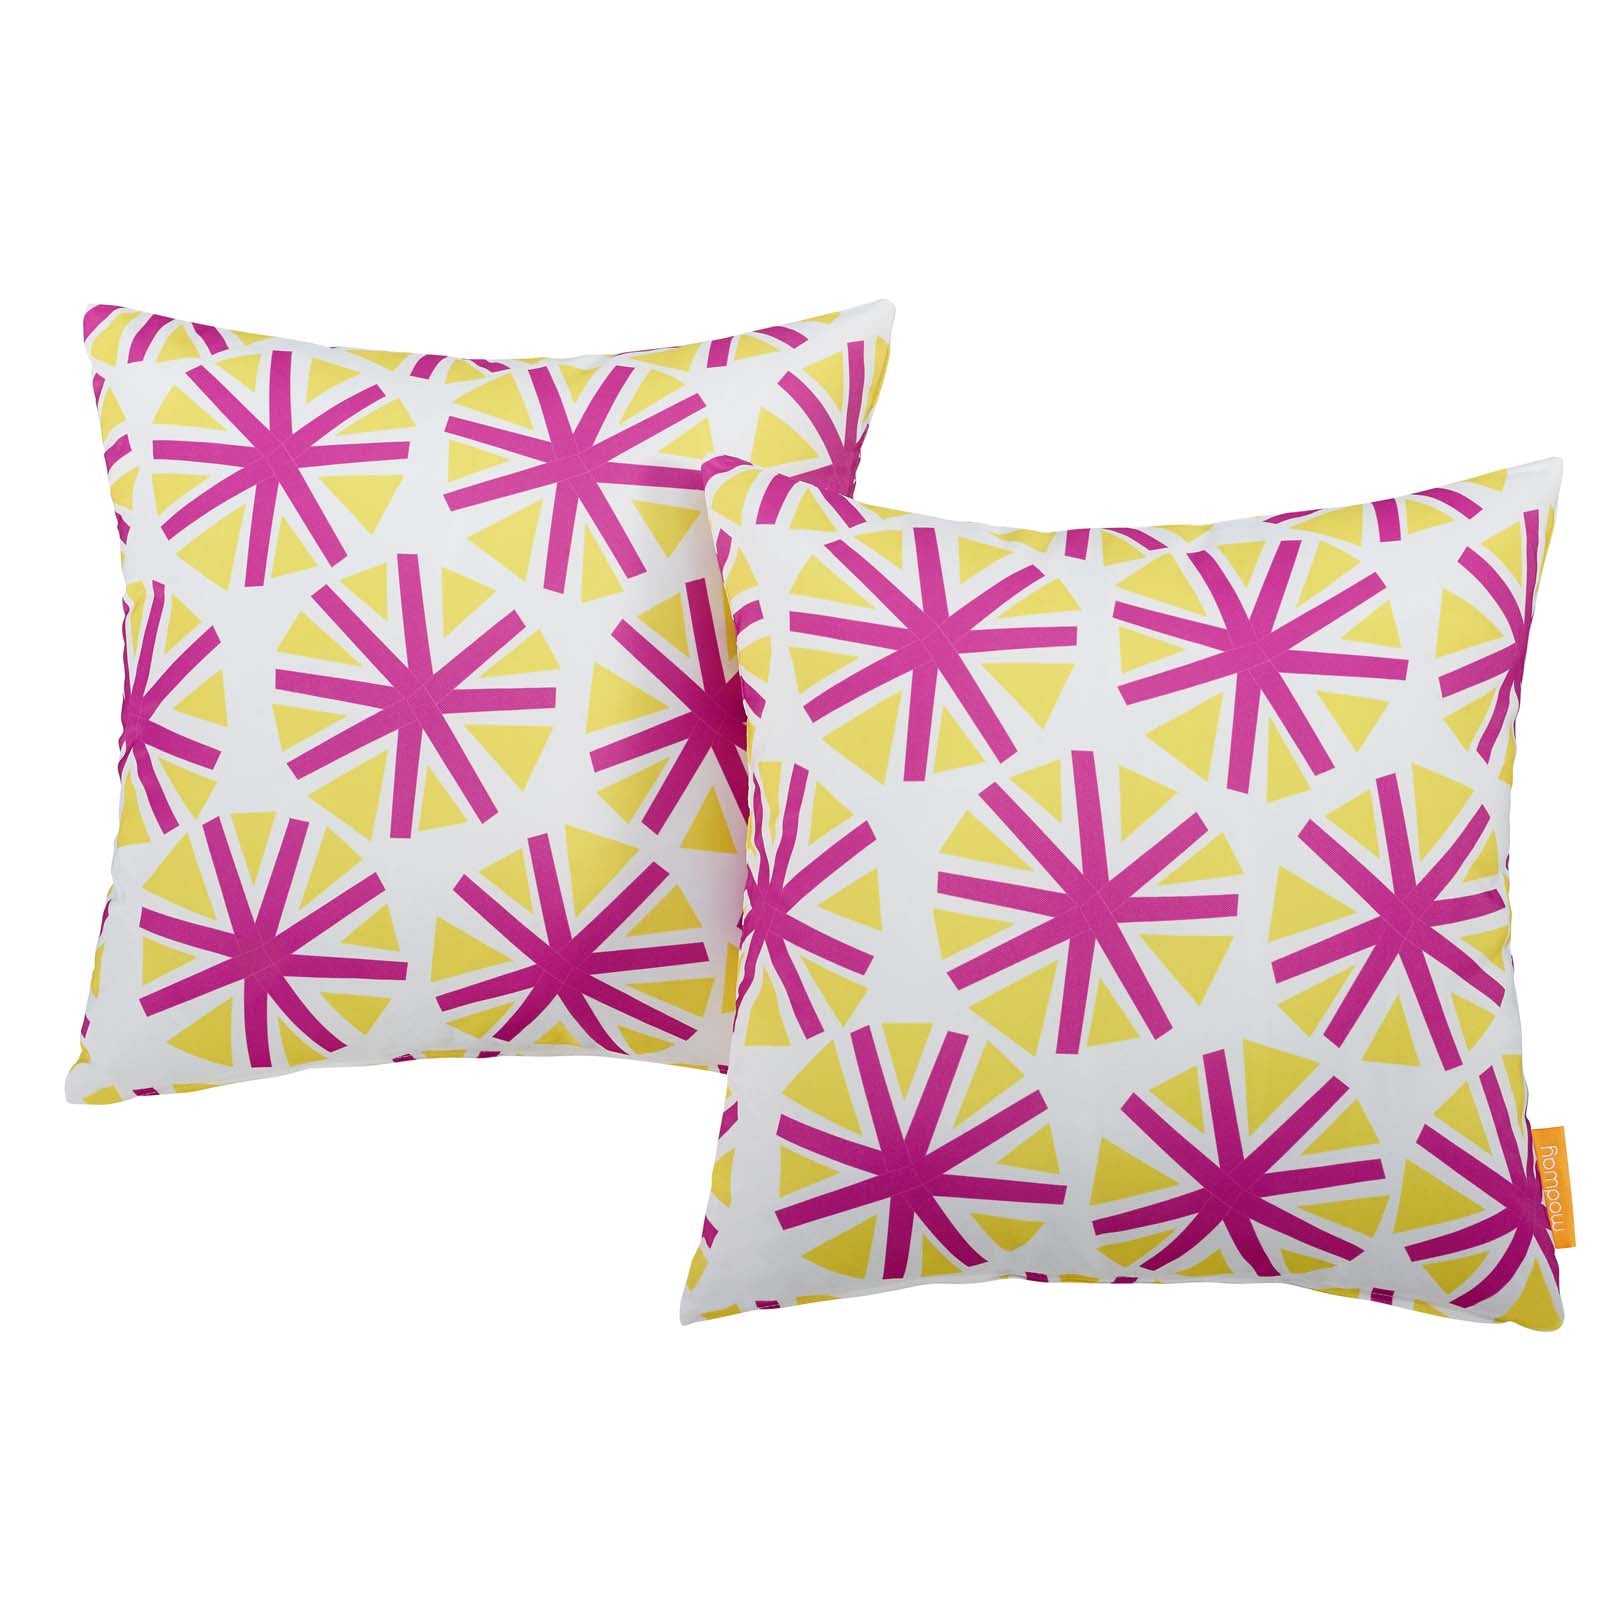 Modway Outdoor Pillows & Cushions - Modway Two Piece Outdoor Patio Pillow Set Starburst